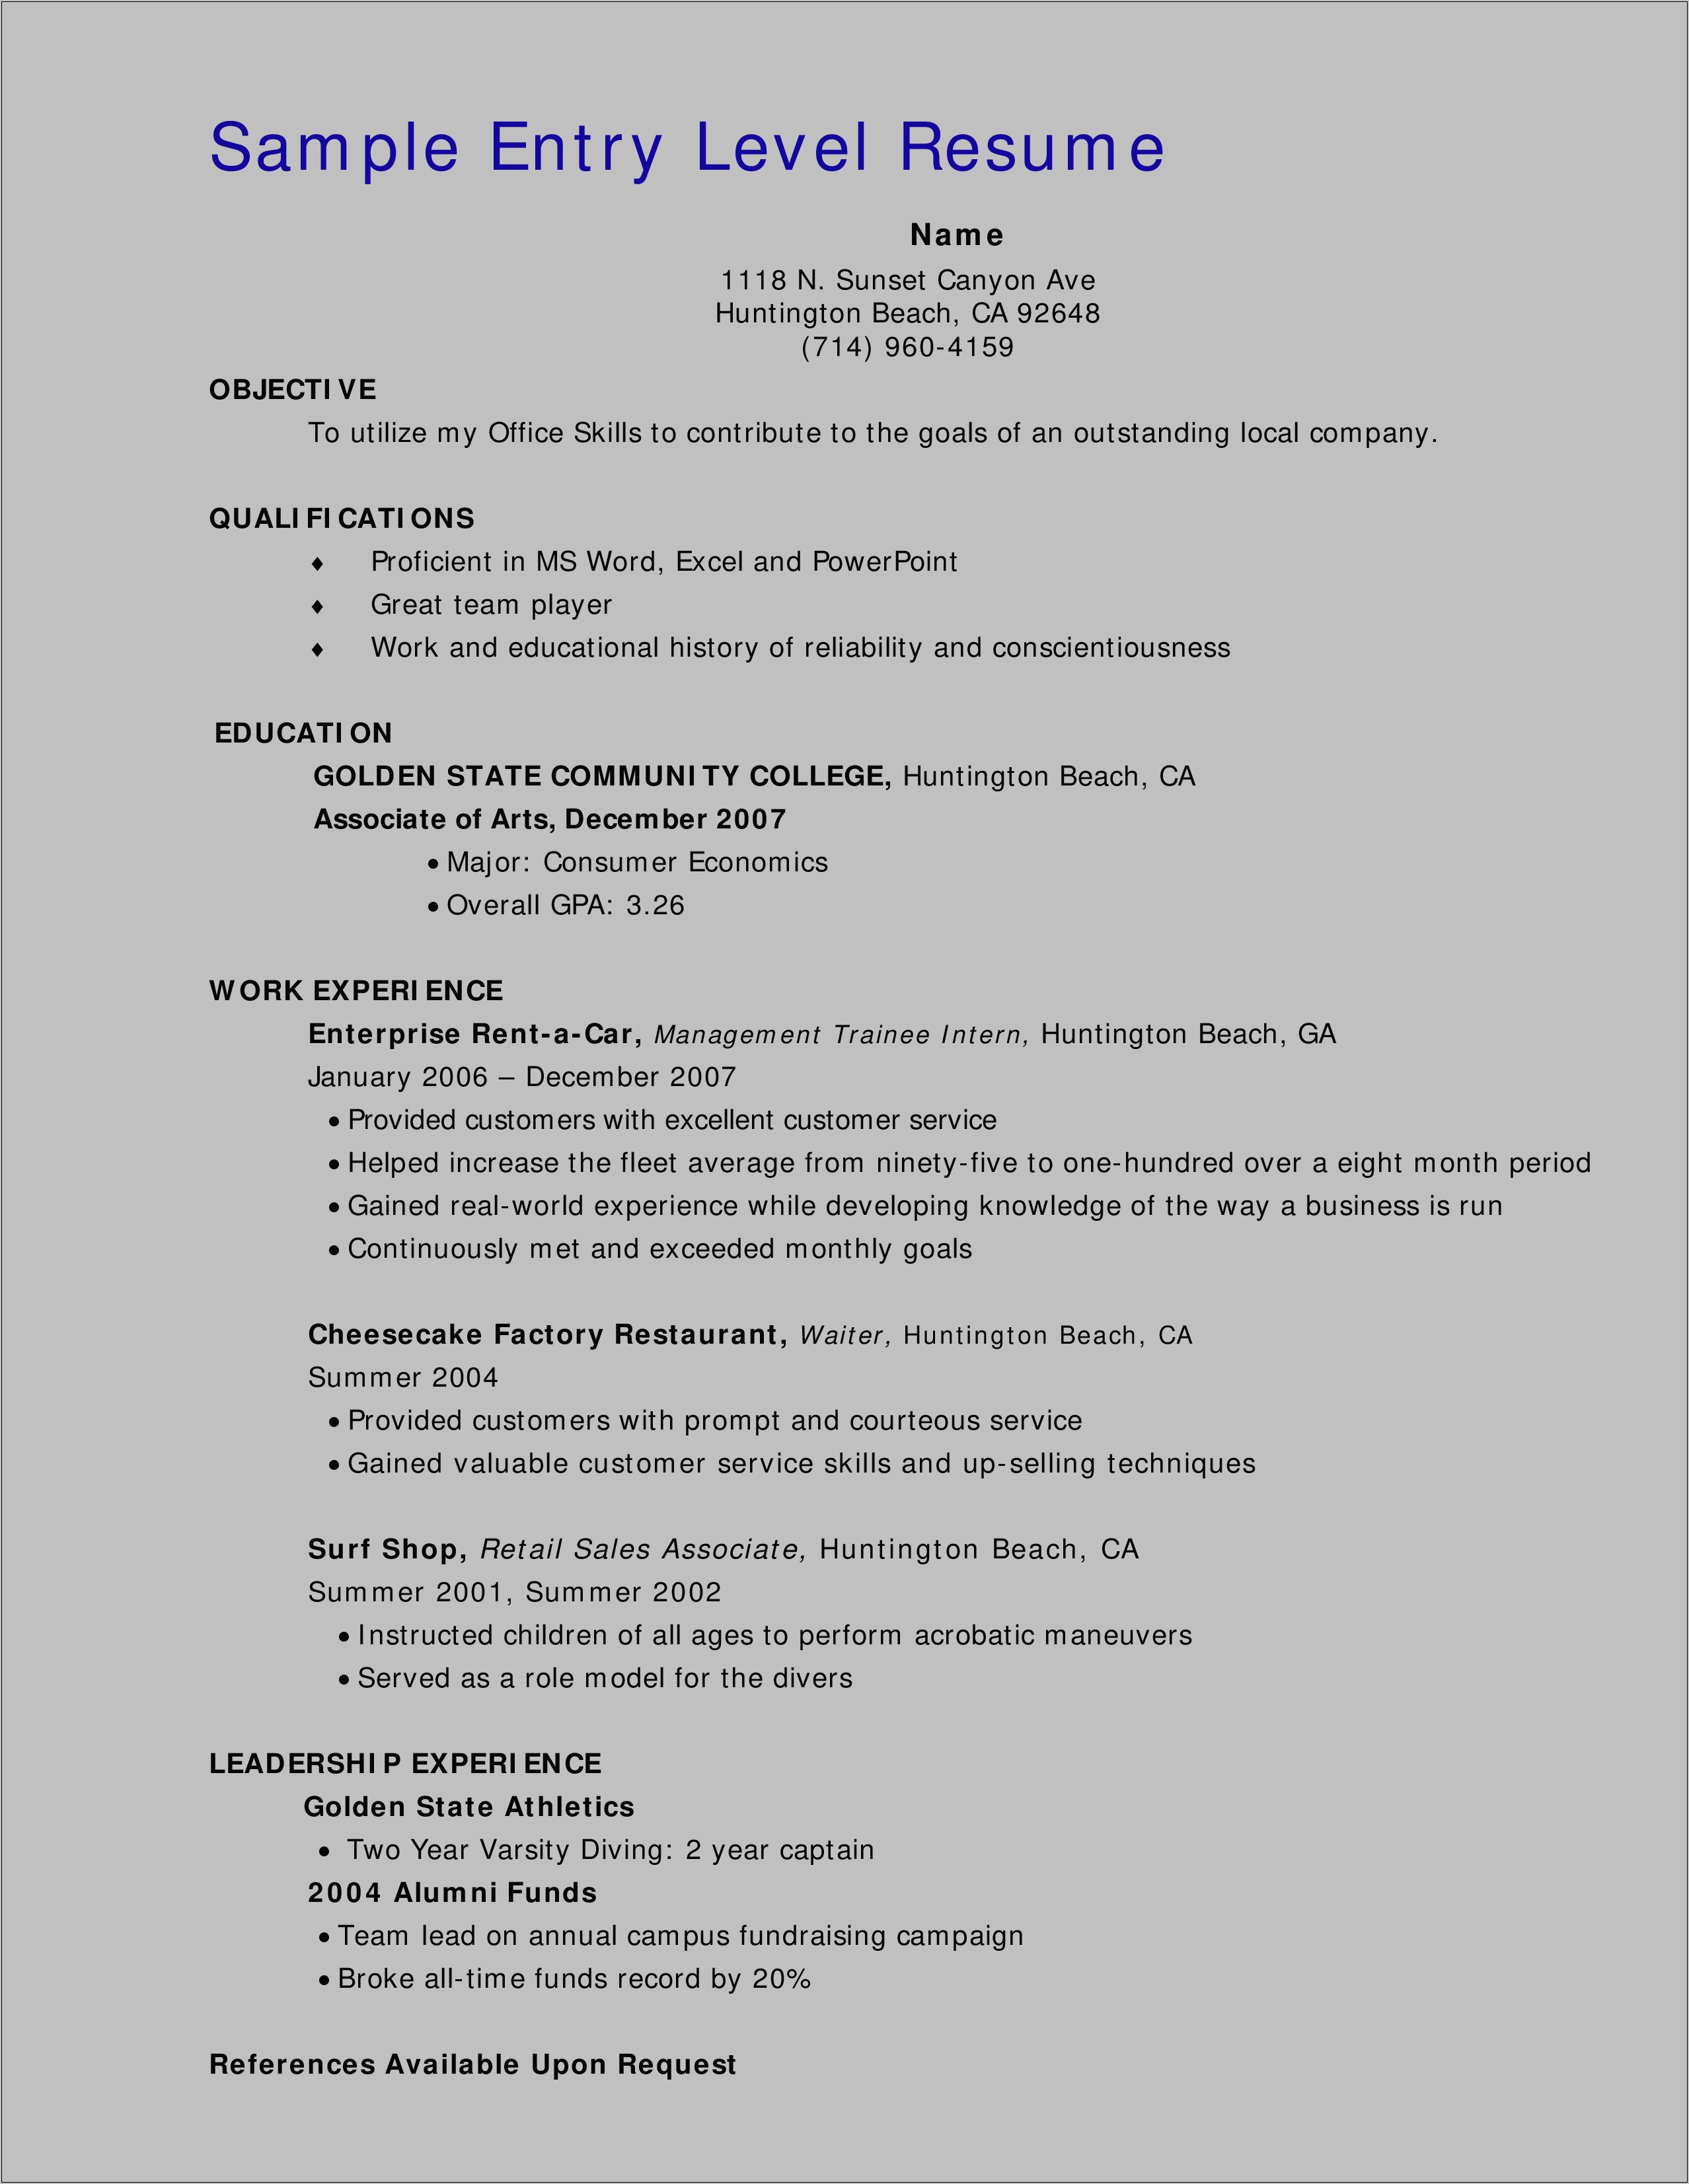 Skills For An Entry Level Resume